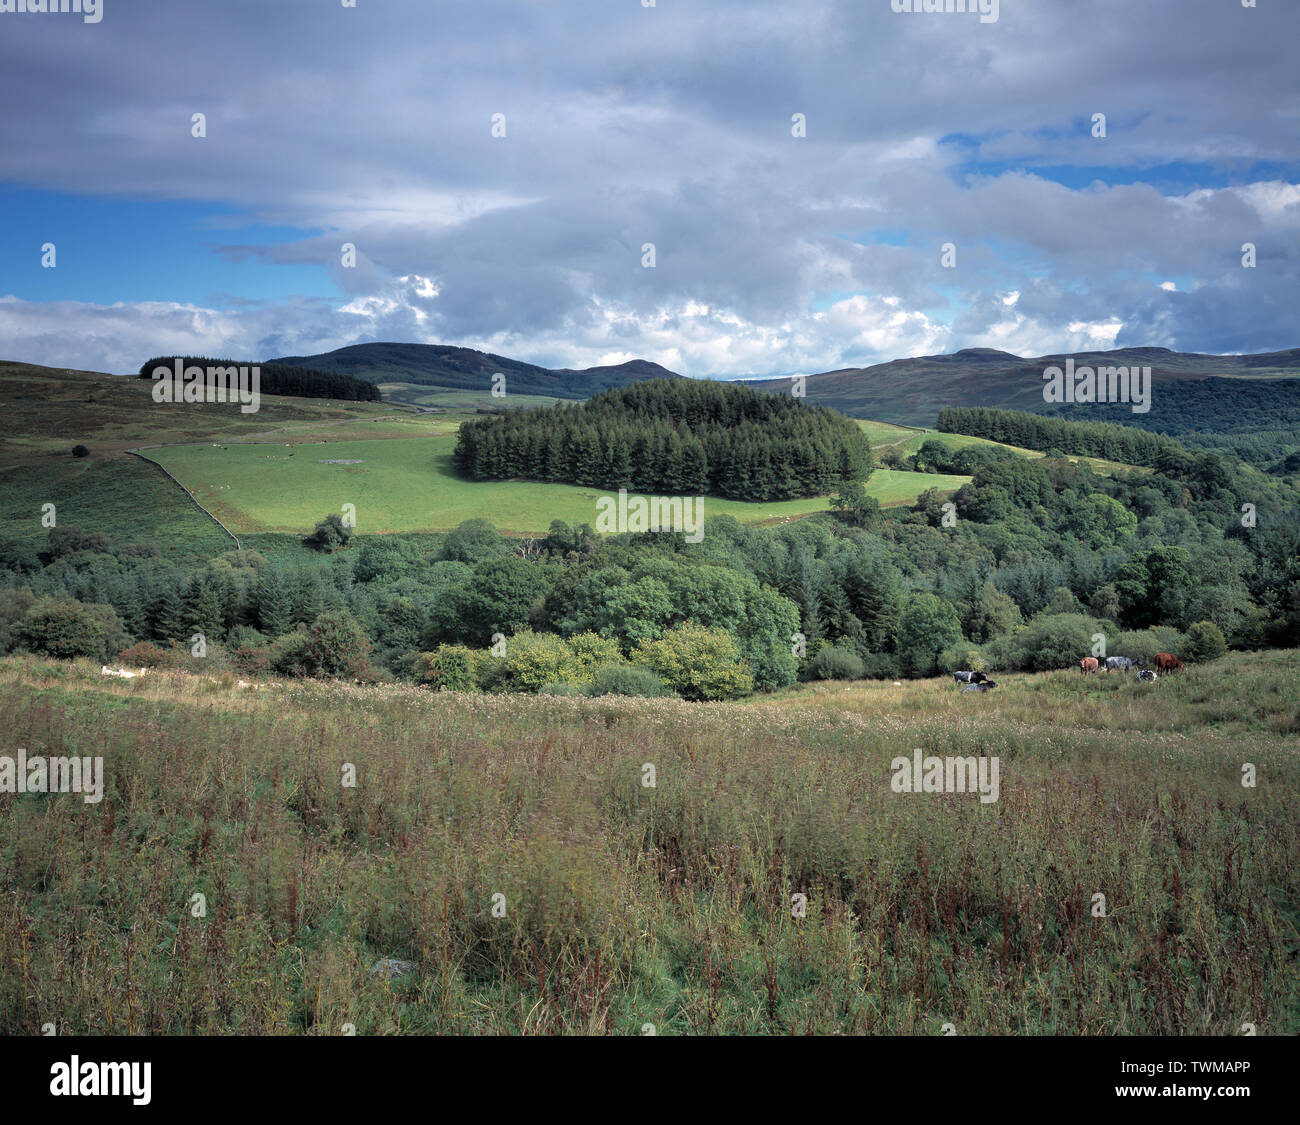 United Kingdom. Scotland. Dumfries and Galloway. Fleet valley. Landscape. Wooded hills. Stock Photo